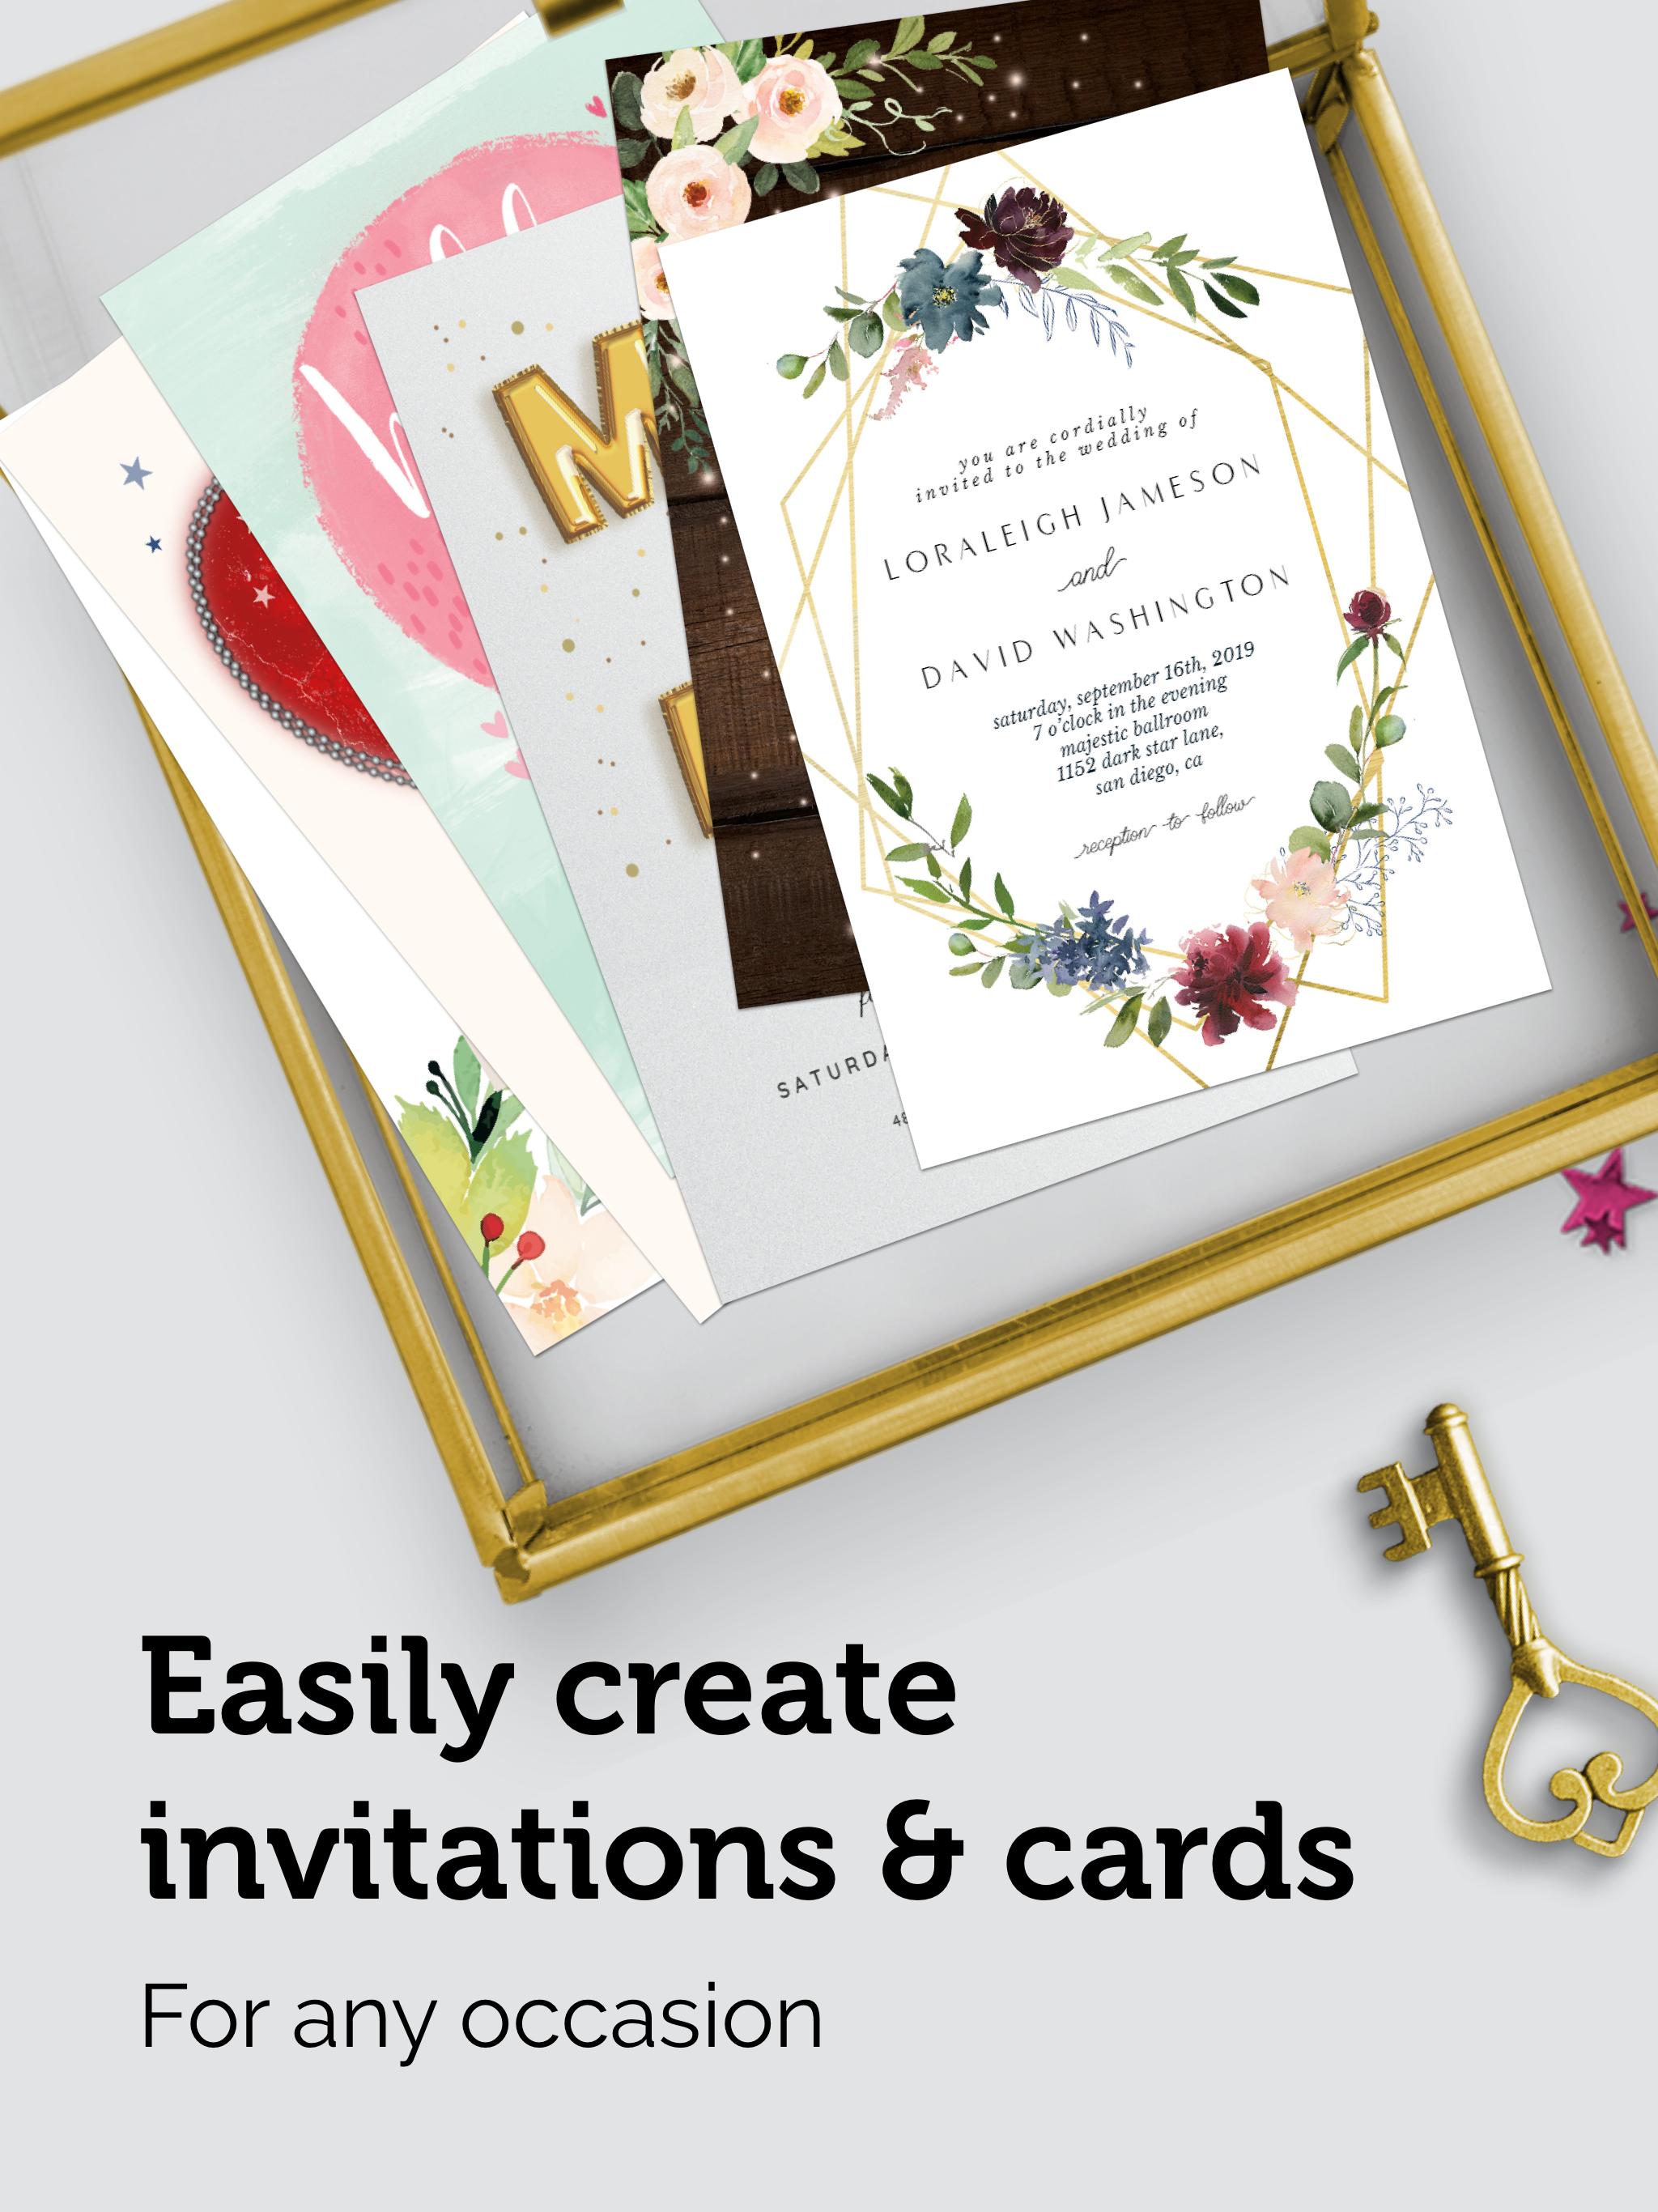 Invitation Card Maker Free by Greetings Island for Android - APK Download